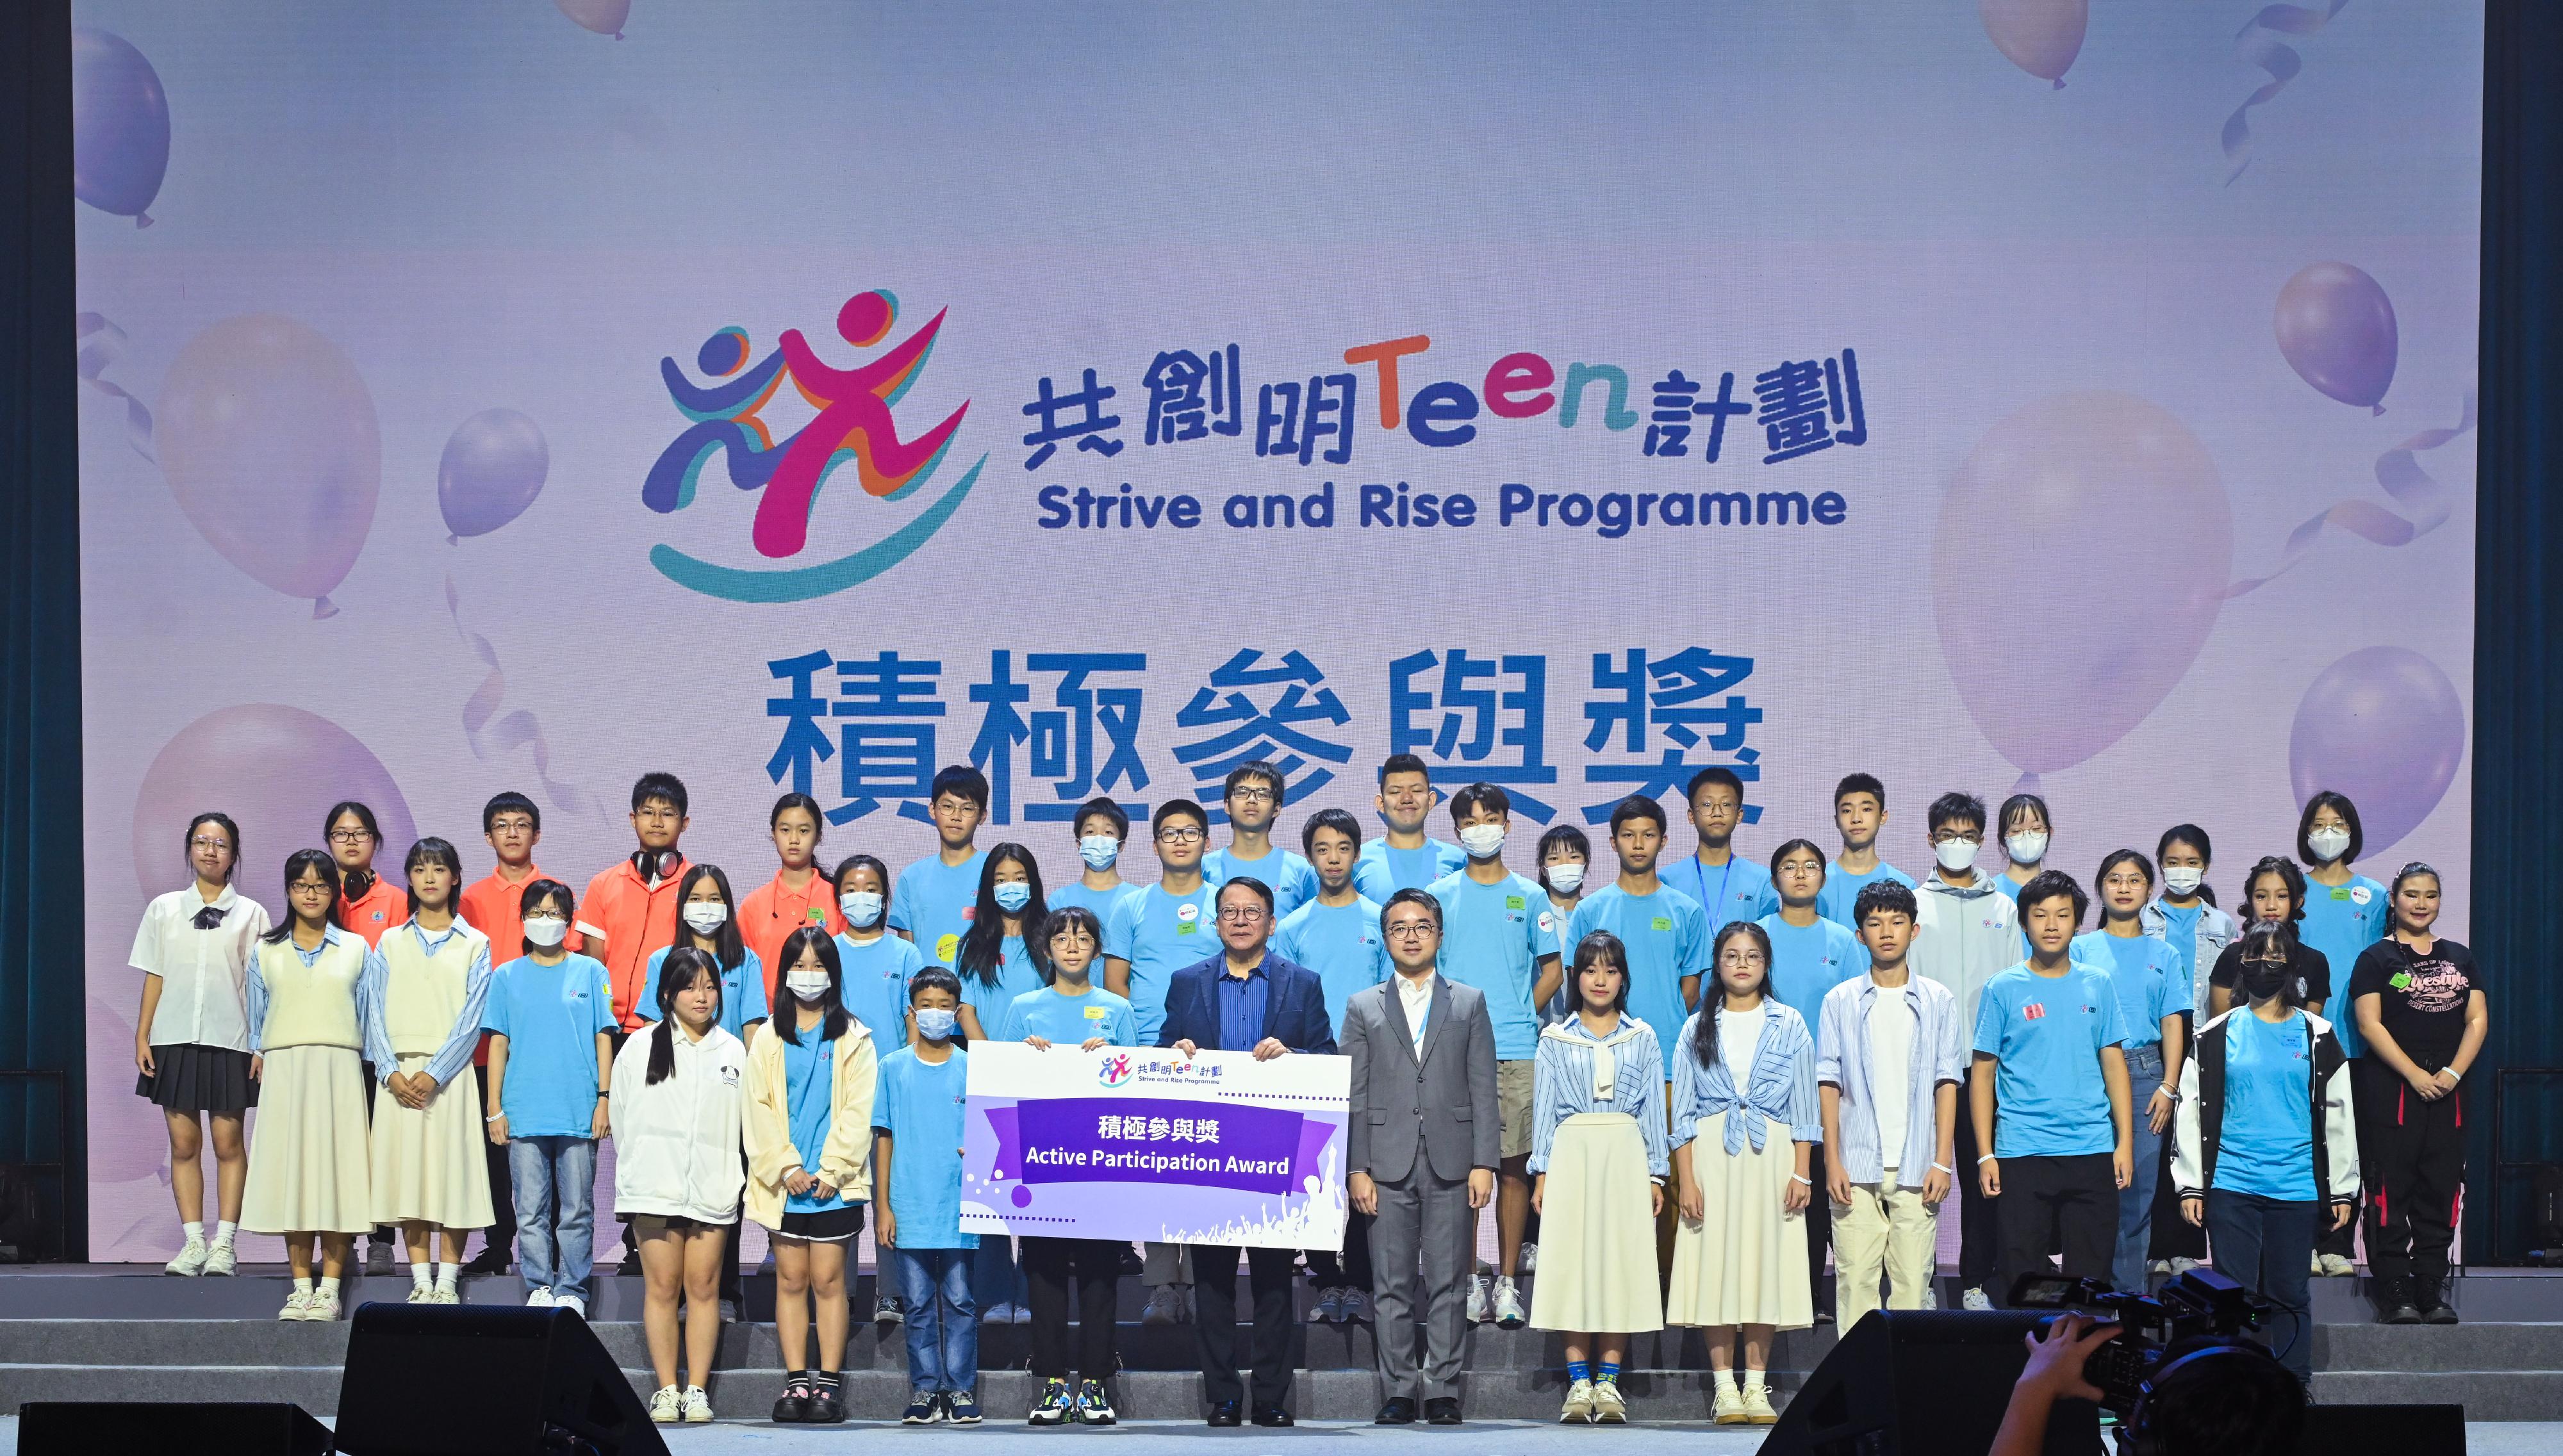 The Chief Secretary for Administration, Mr Chan Kwok-ki, attended the Graduation Ceremony of the Strive and Rise Programme today (November 4). Photo shows Mr Chan (front row, fifth left) and the Acting Secretary for Education, Mr Sze Chun-fai (front row, sixth left), with awarded mentees.
